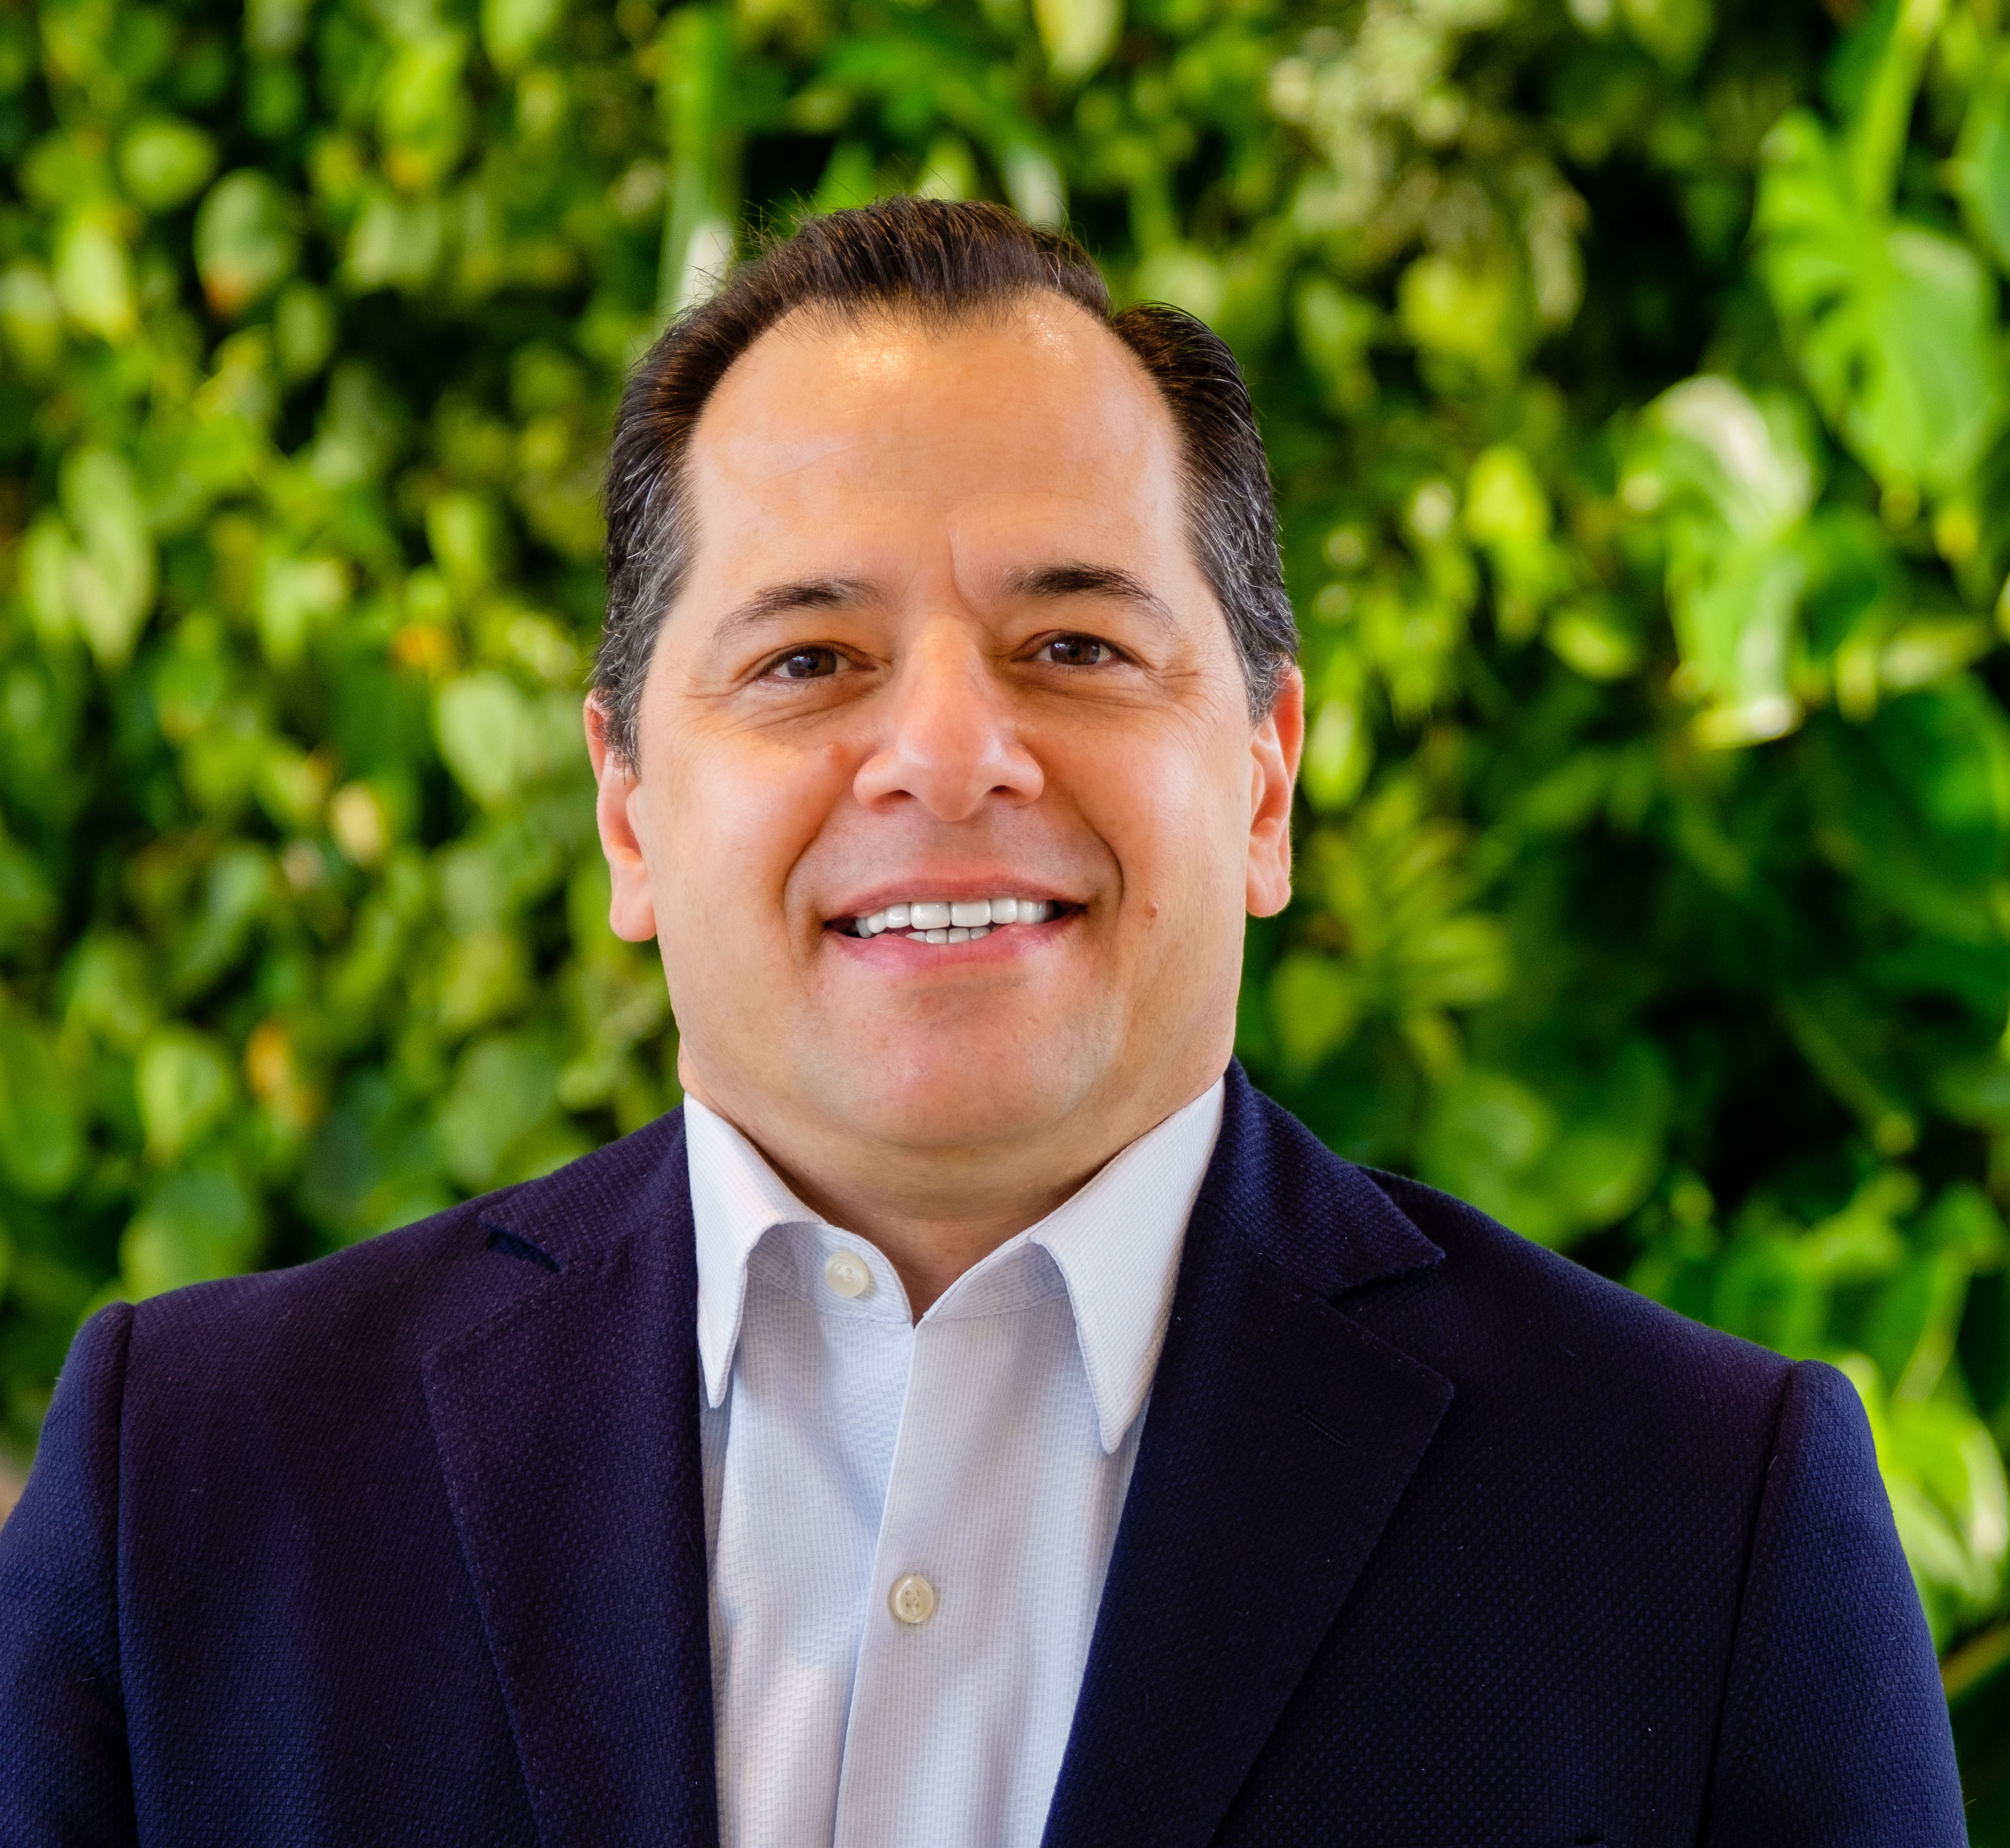 Mauro Luna takes over as President of Körber Business Area Tissue in Latin America